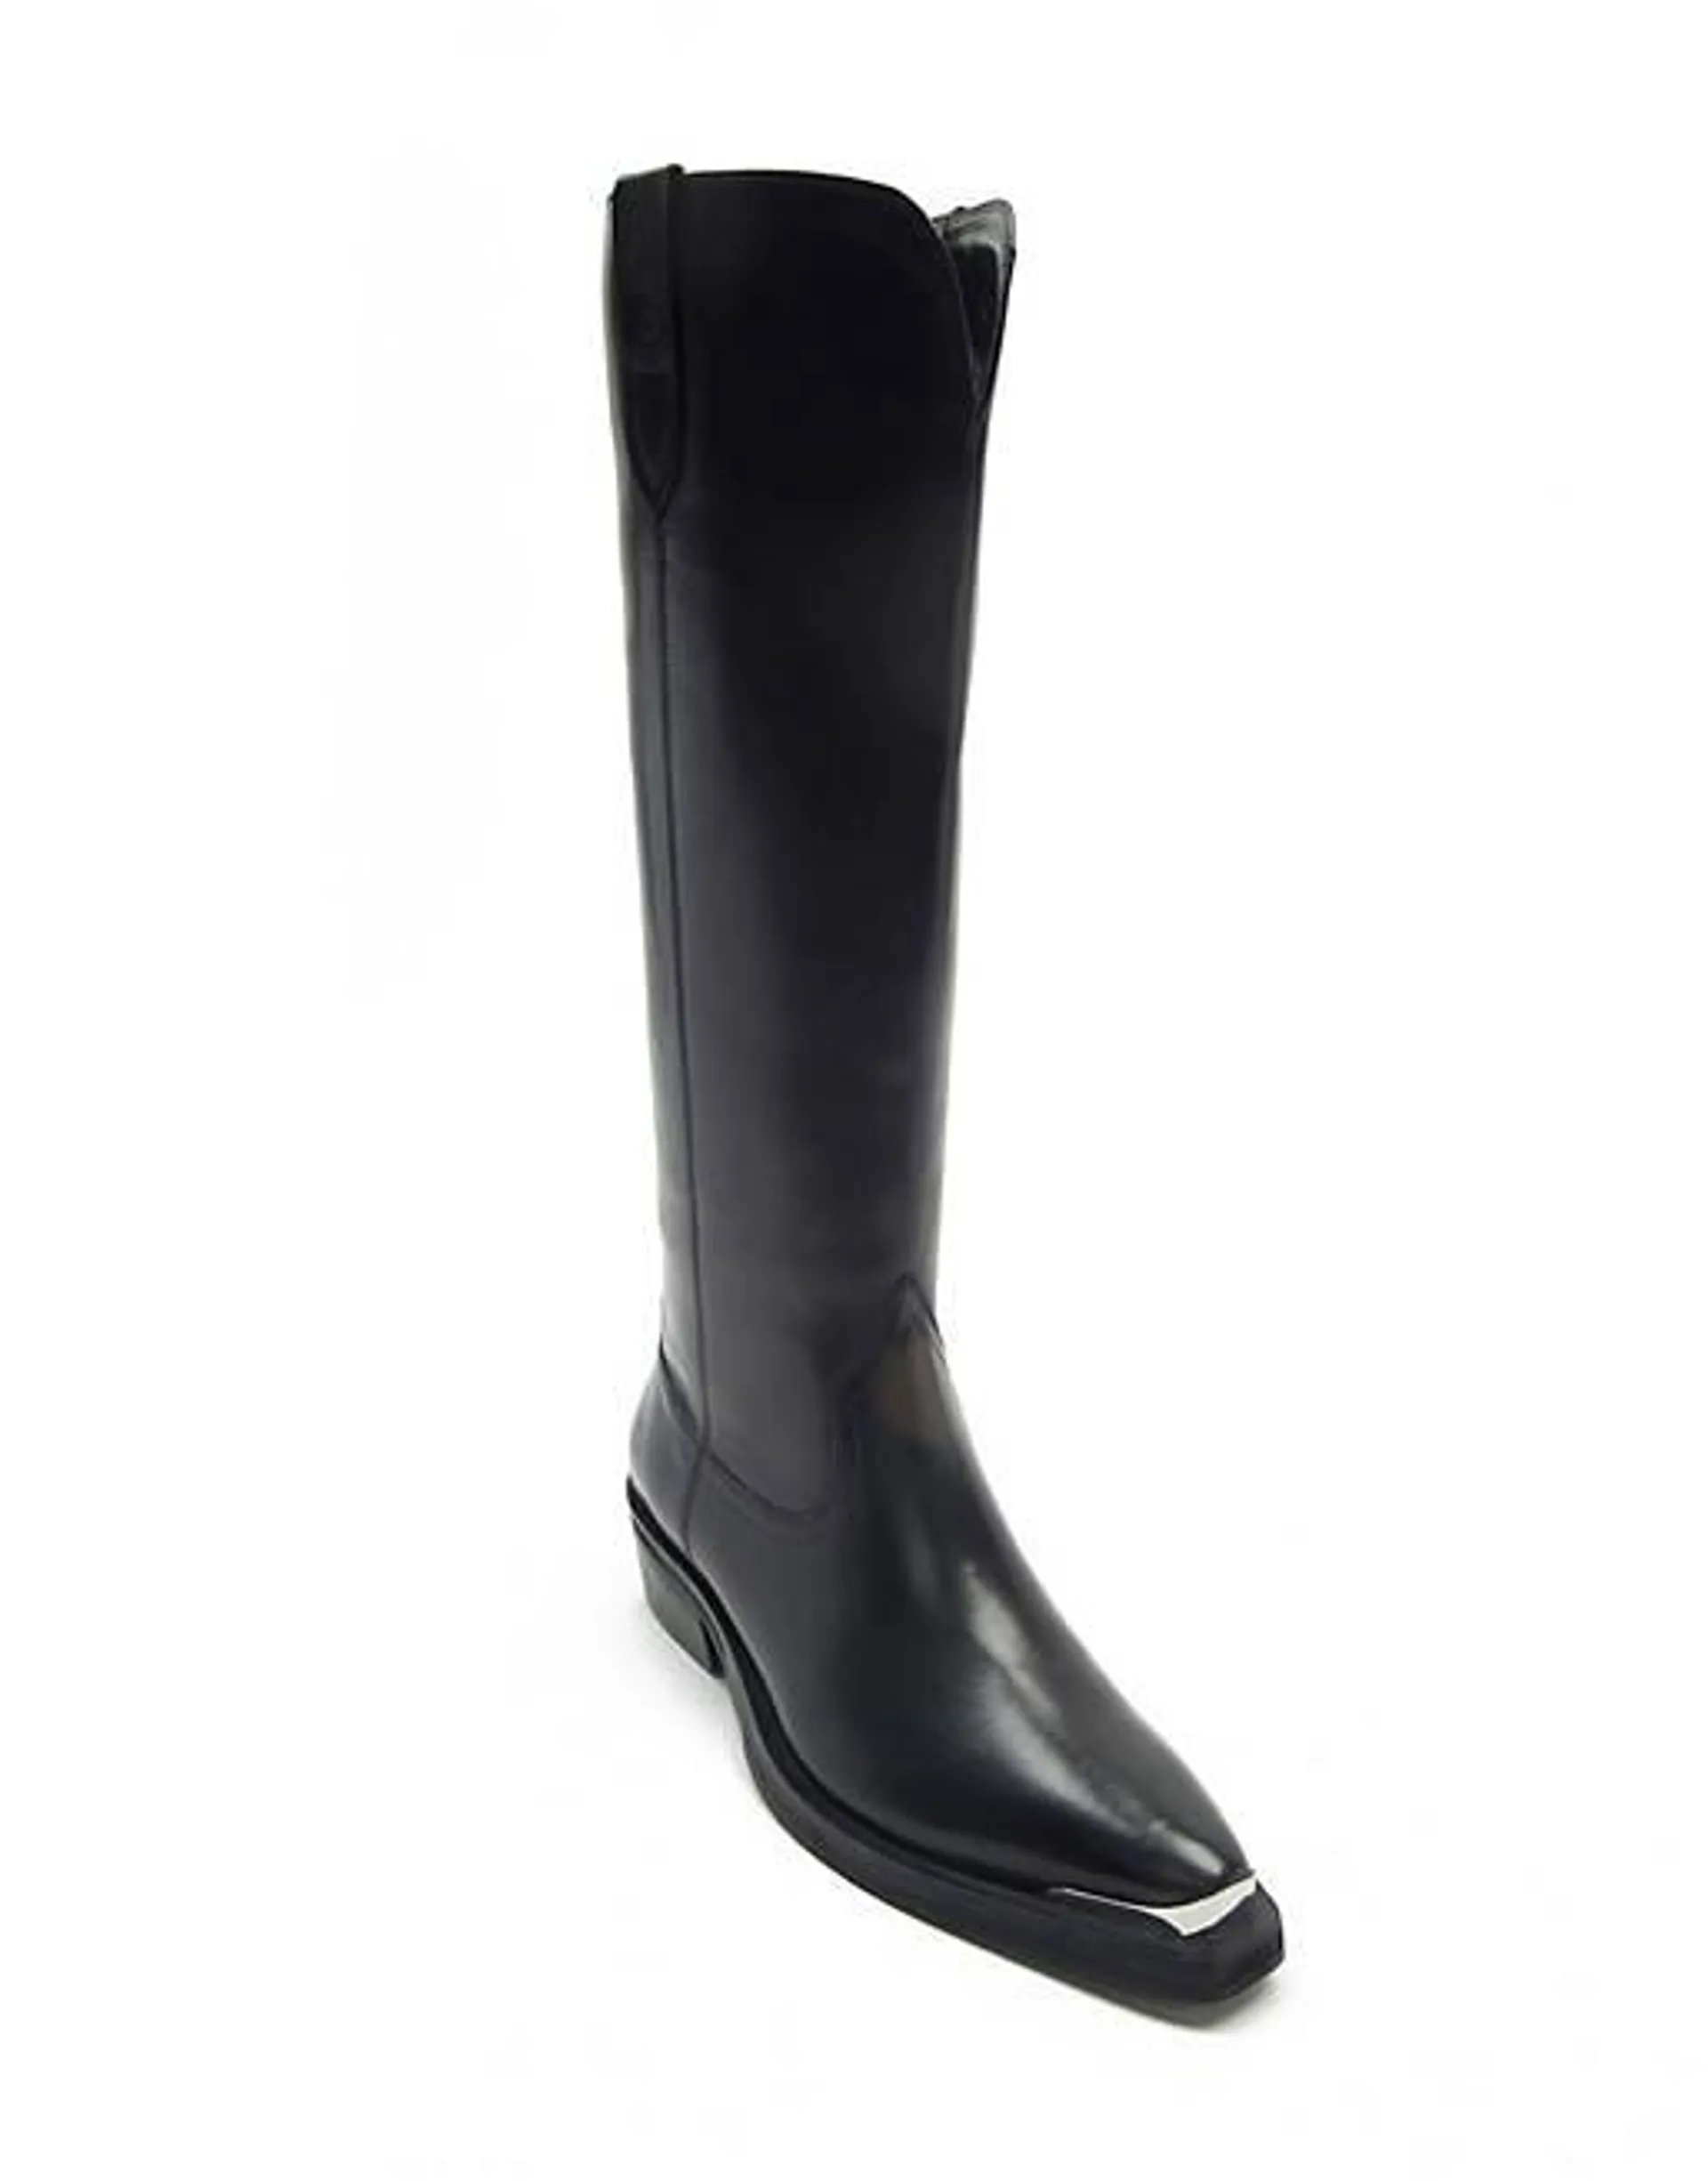 Off The Hook 'acton' leather knee high biker boots in black